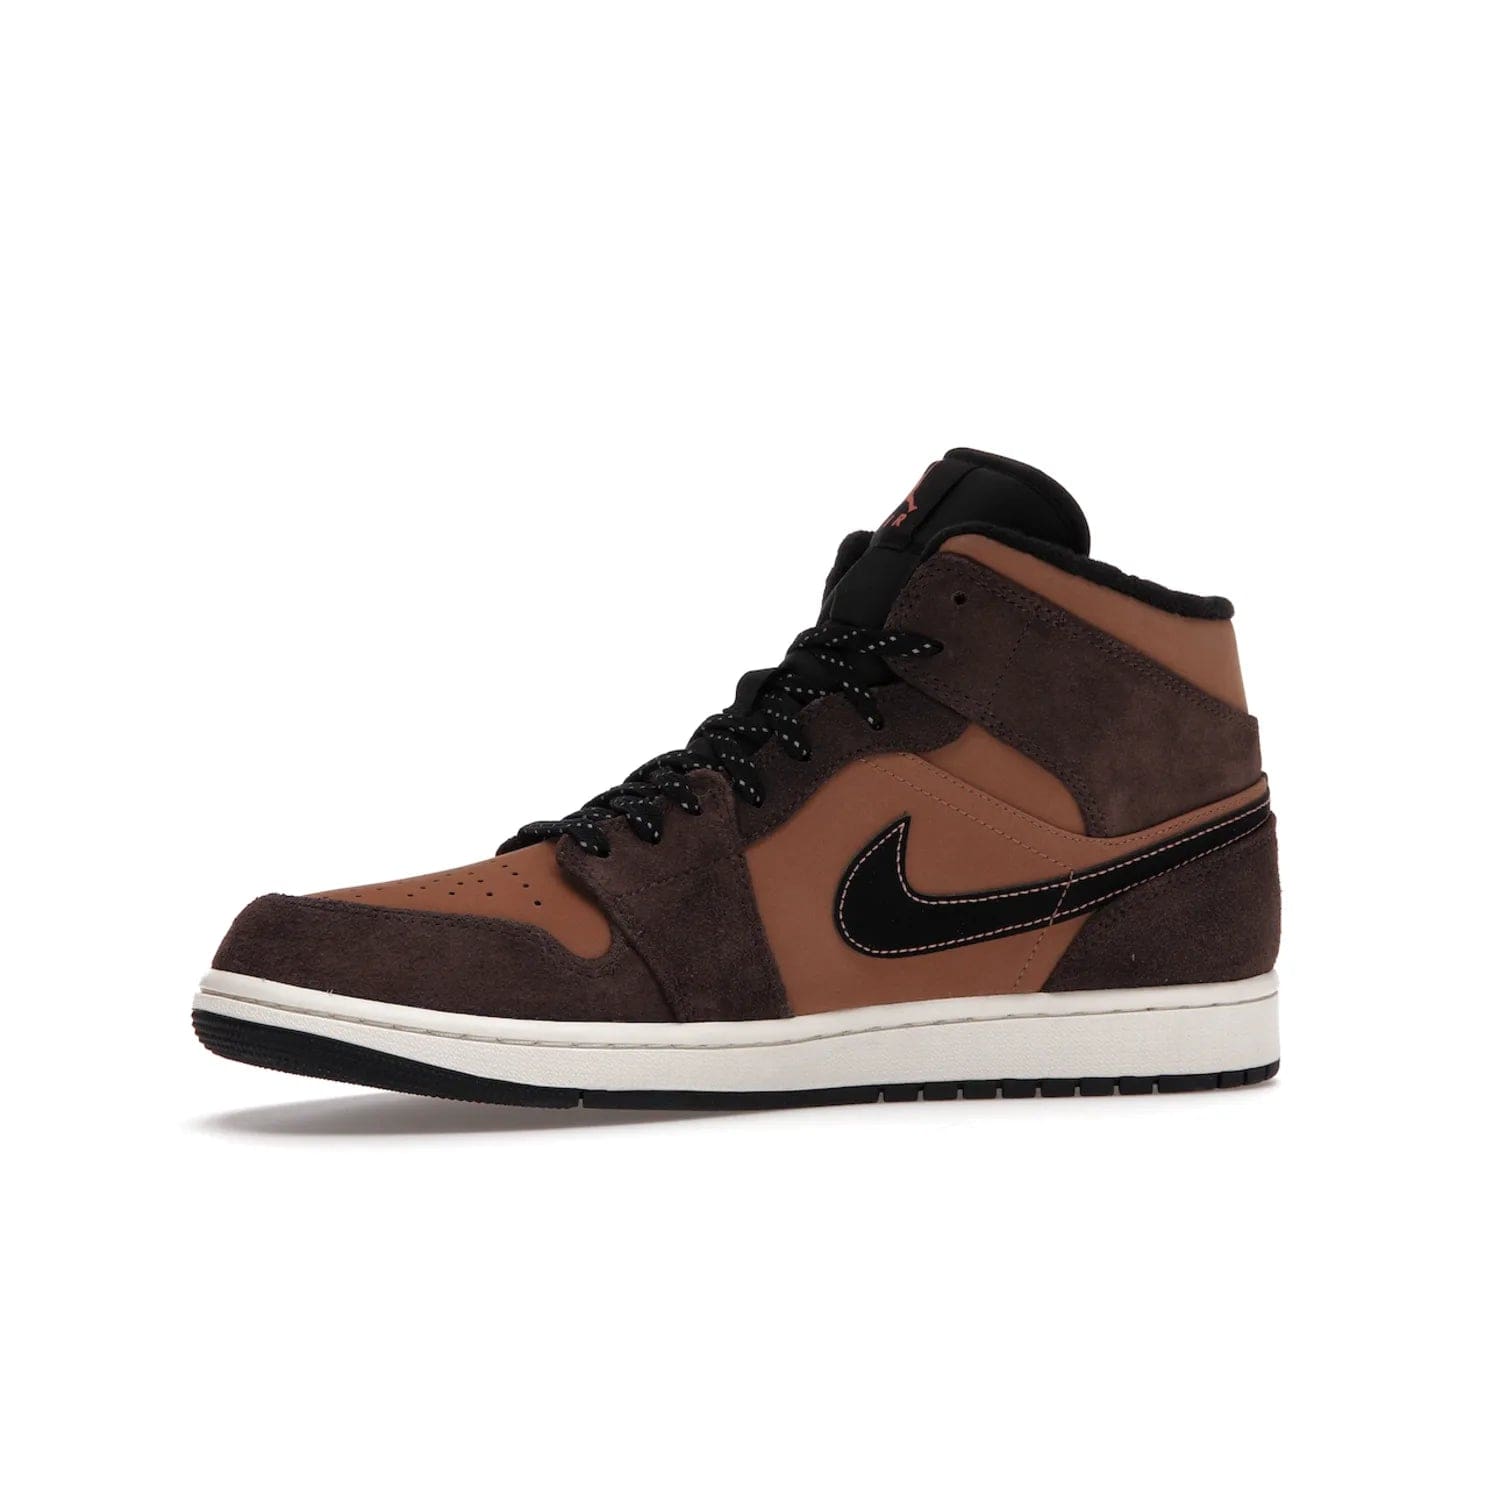 Jordan 1 Mid SE Dark Chocolate - Image 17 - Only at www.BallersClubKickz.com - This fashionable and functional Jordan 1 Mid SE Dark Chocolate features a light brown Durabuck upper, dark brown suede overlays, black Swoosh logos and reflective patch at heel. A must-have for any sneakerhead!